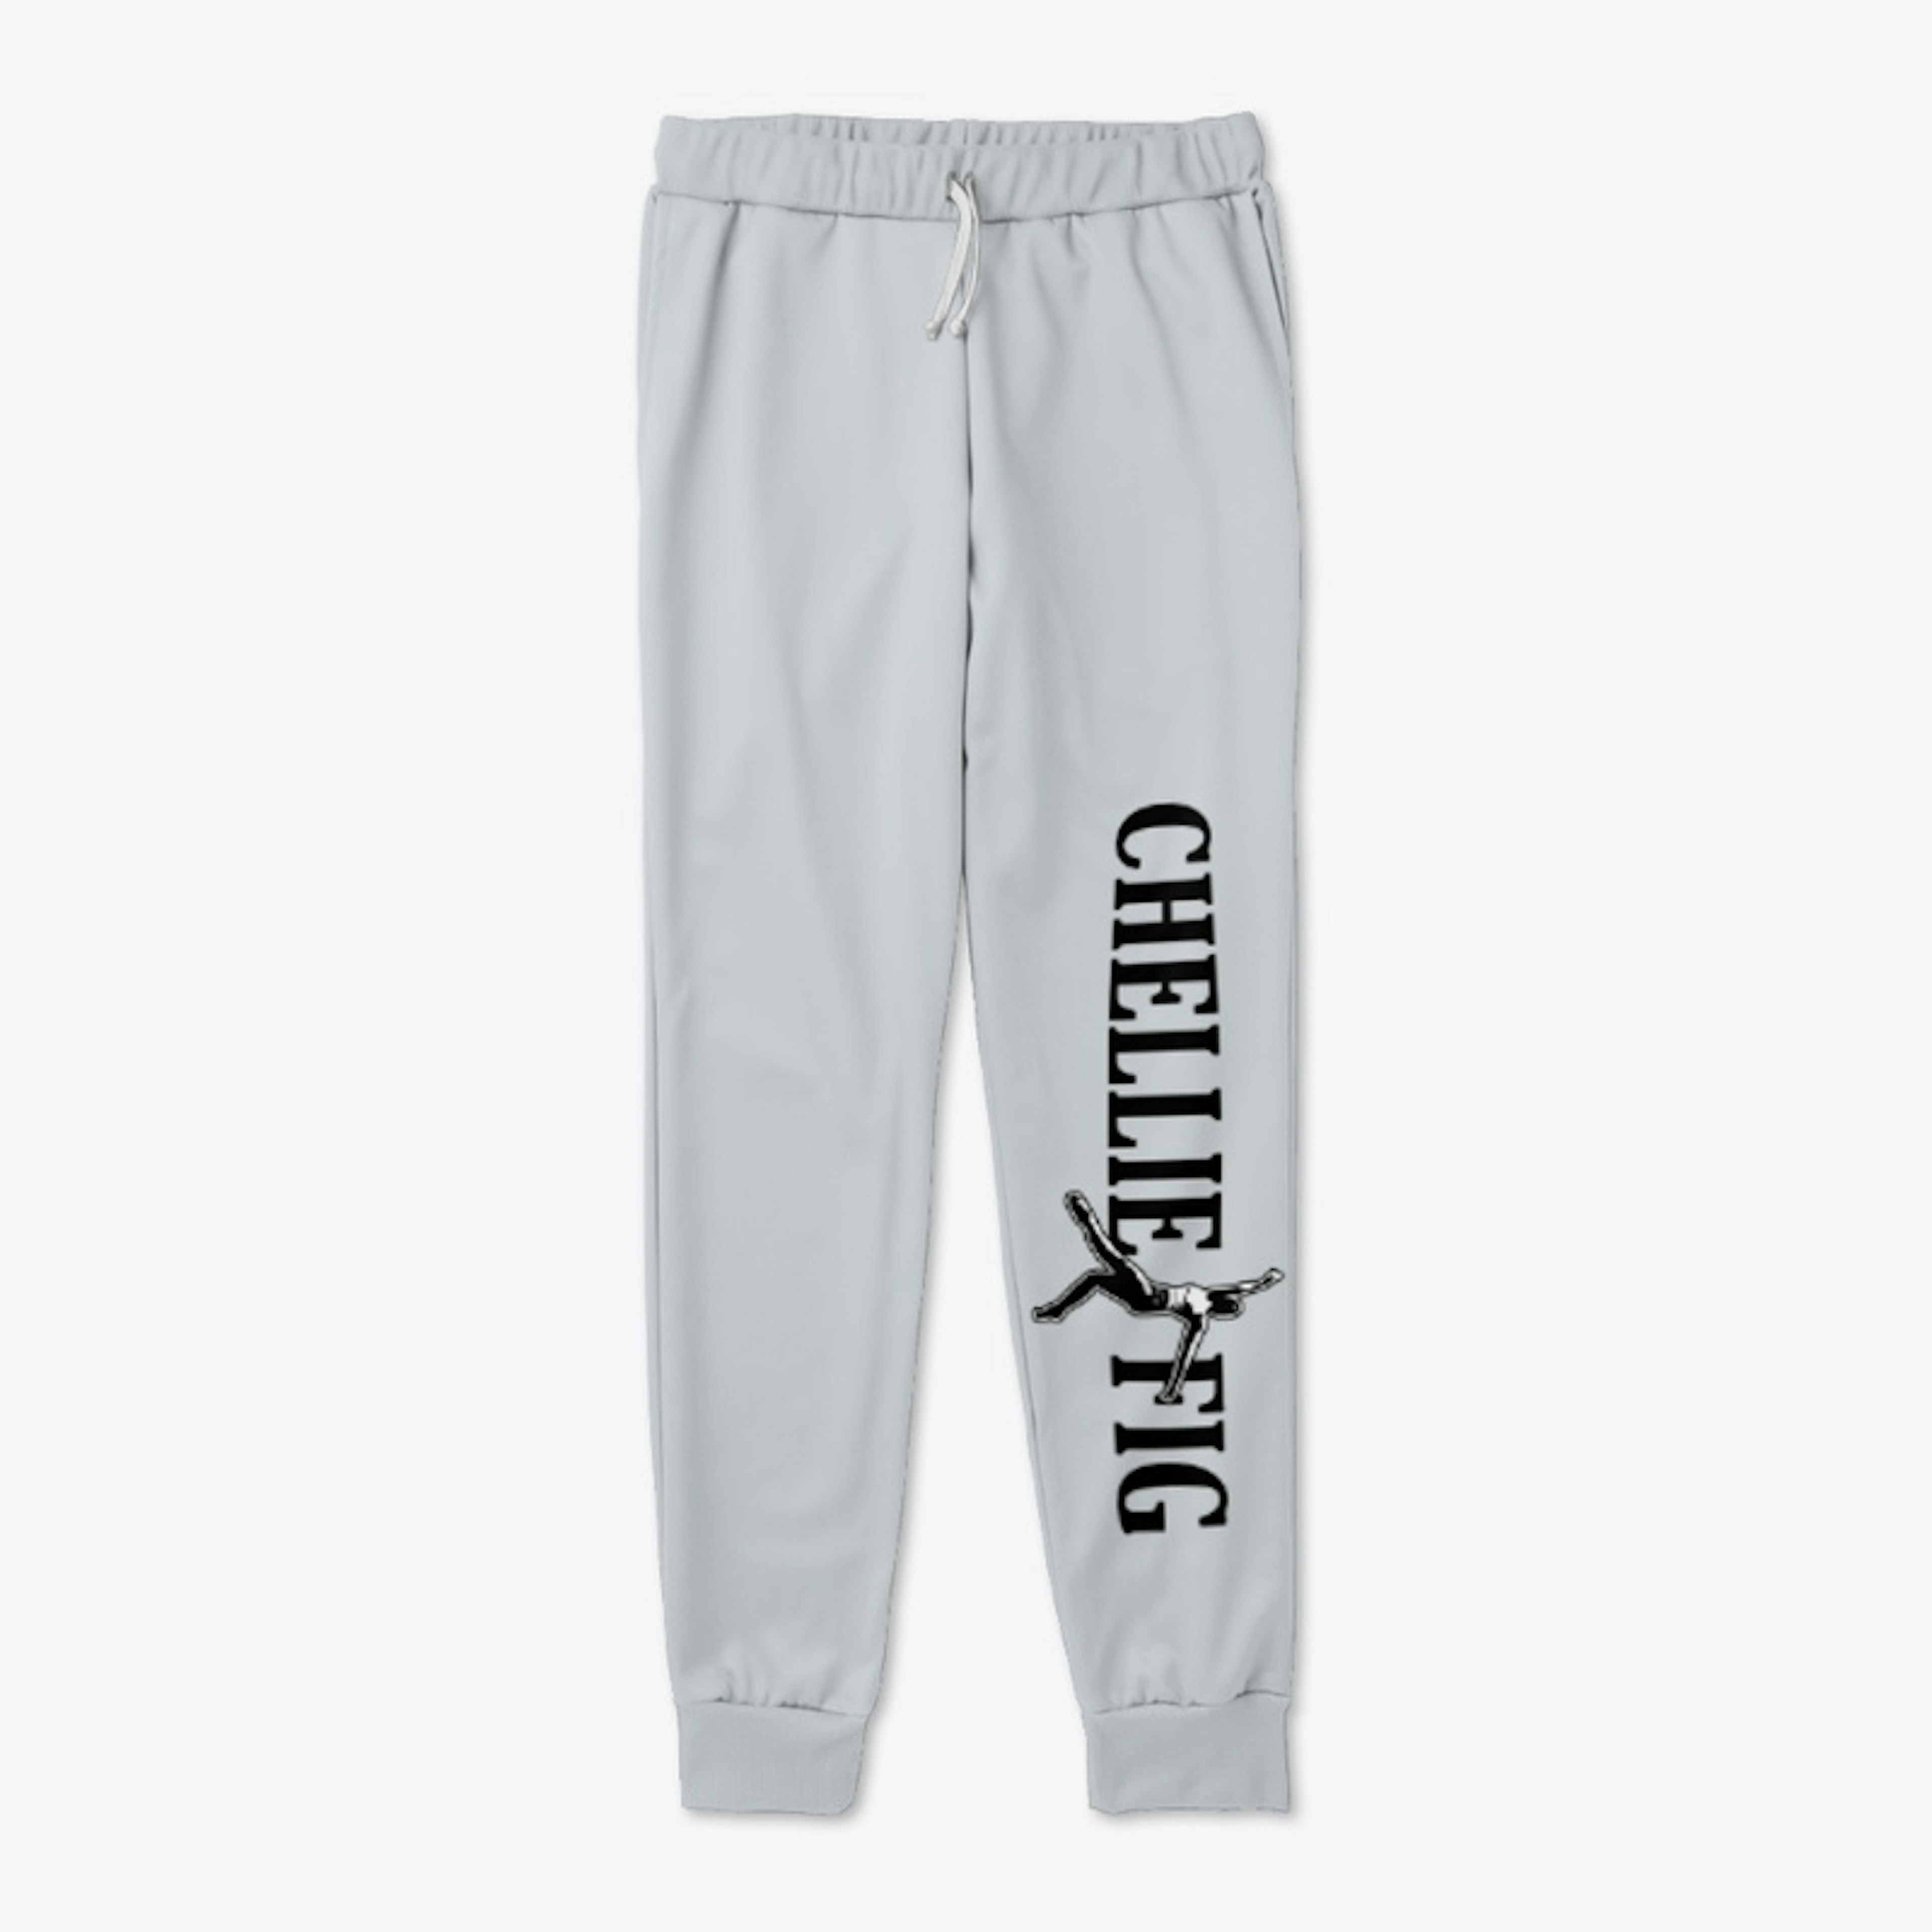 ChellieFig Joggers